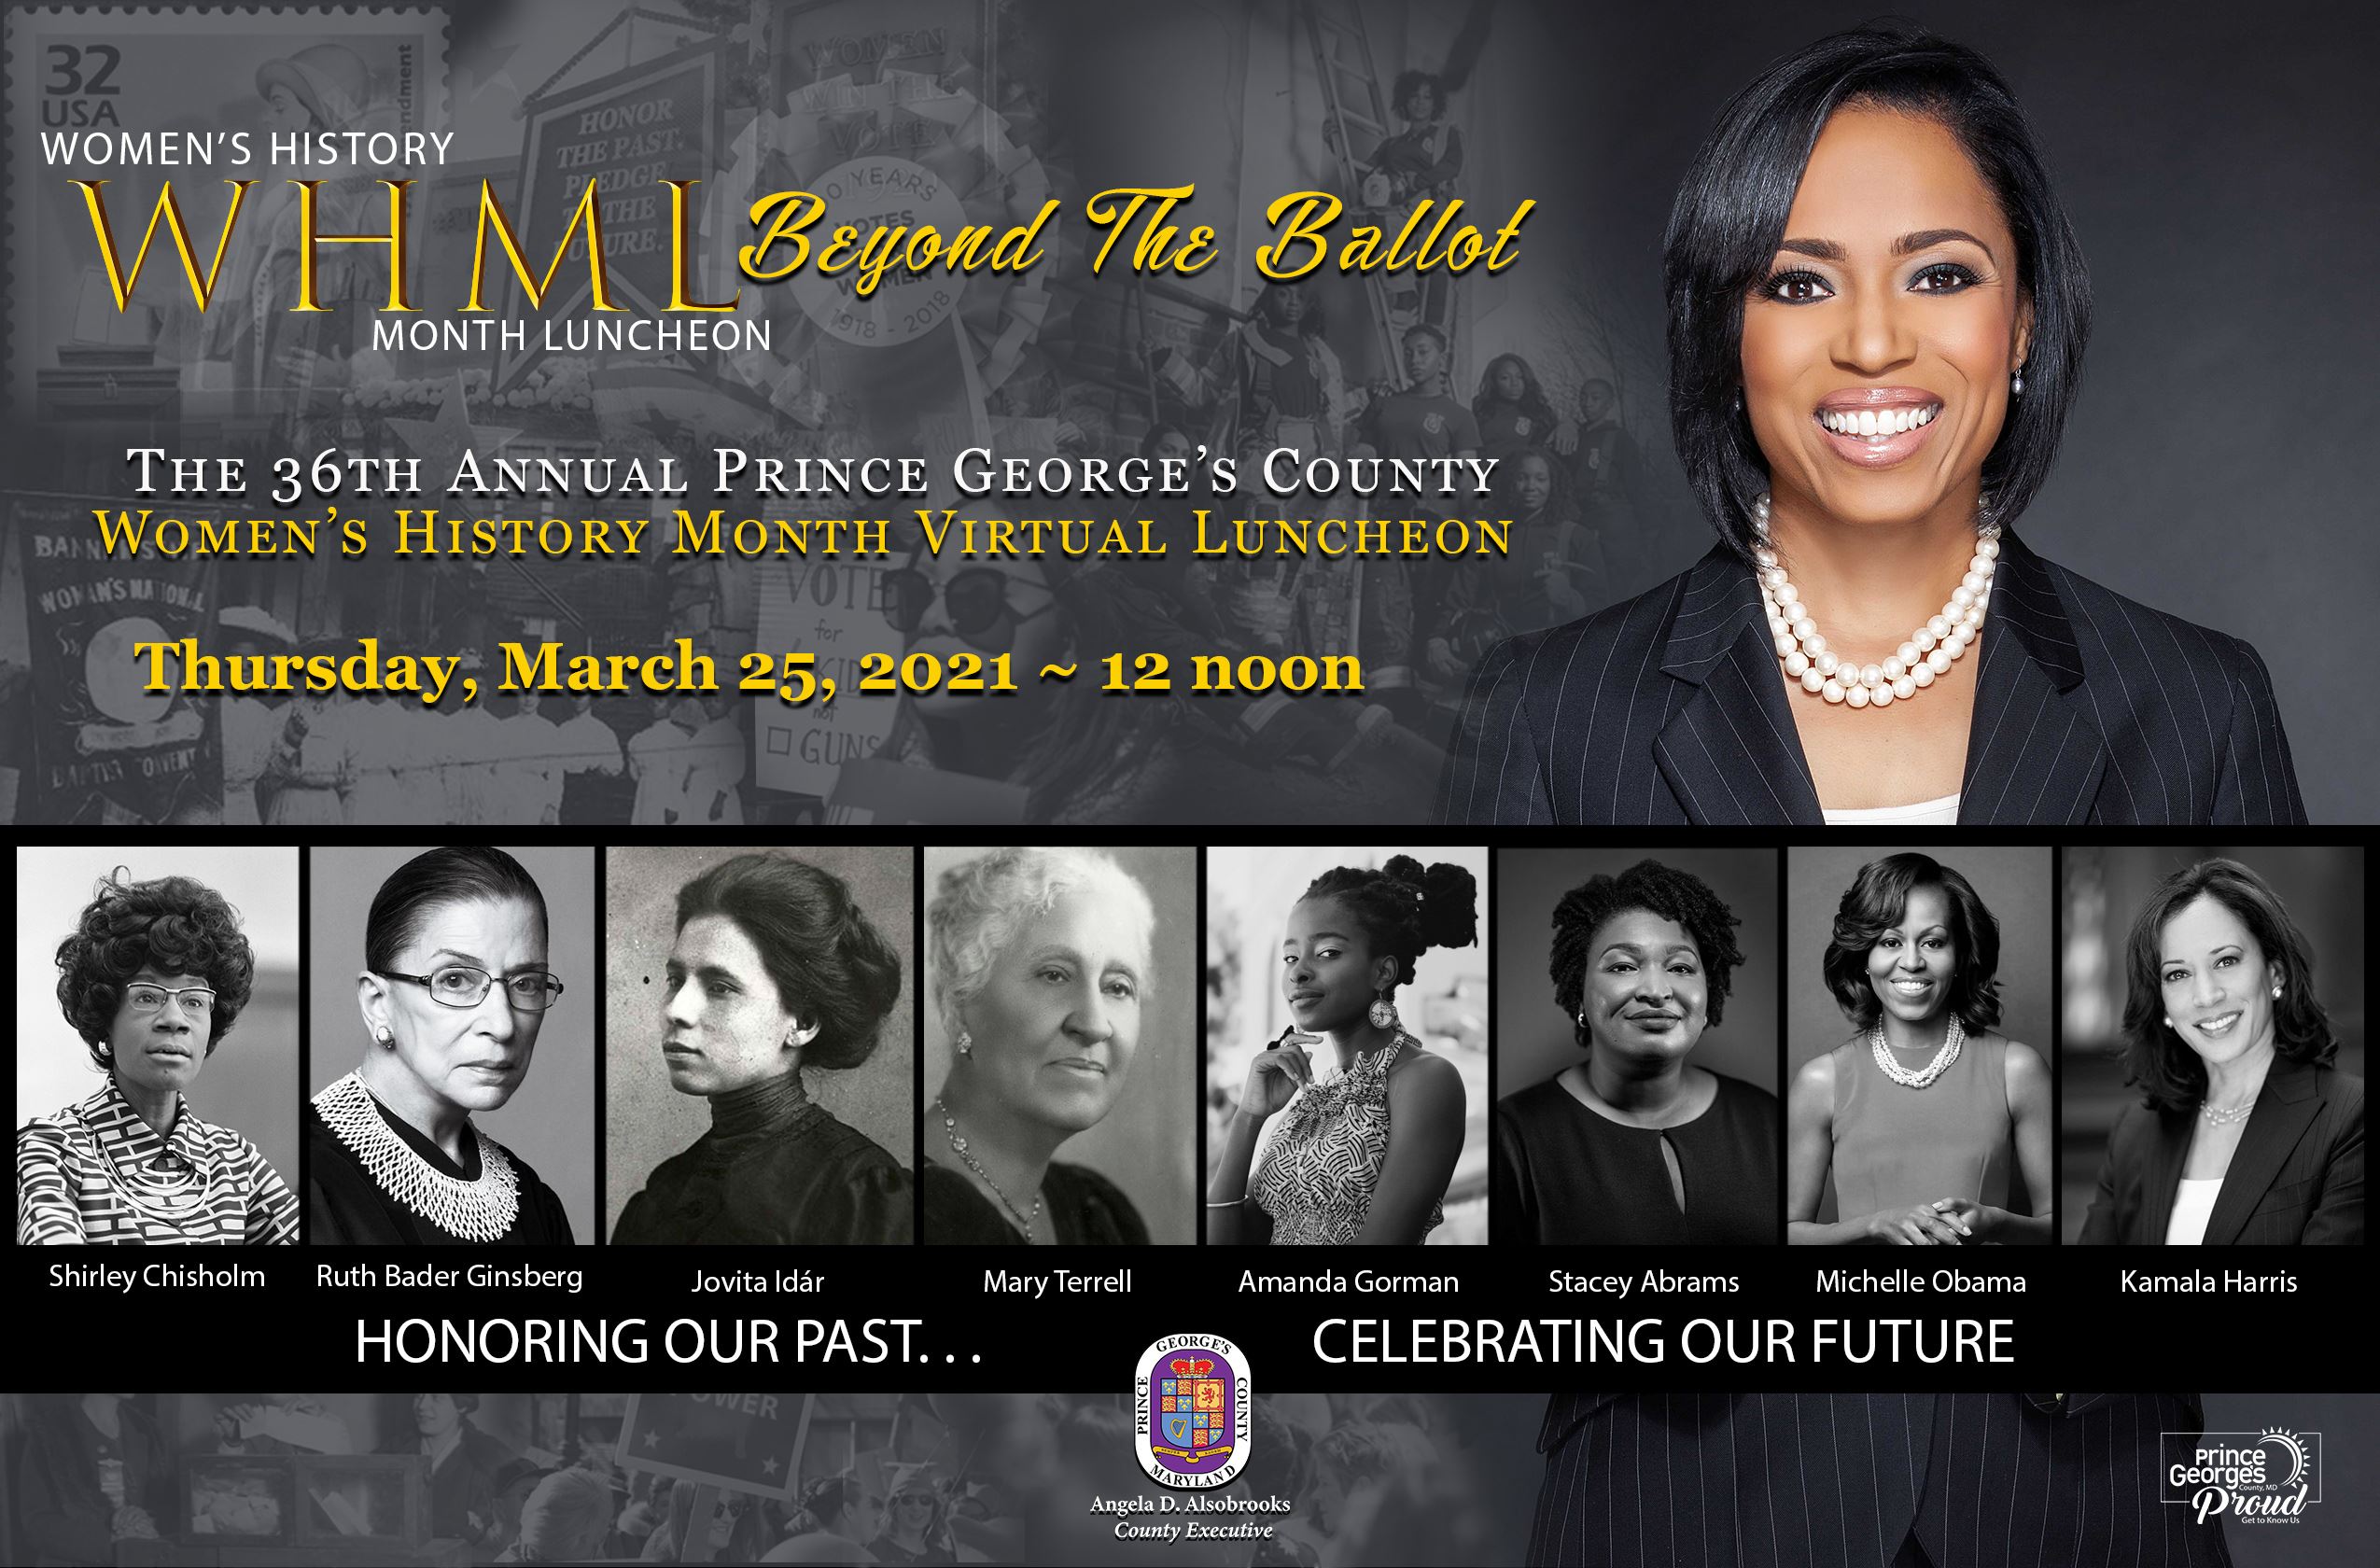 Women's History Month Luncheon flyer